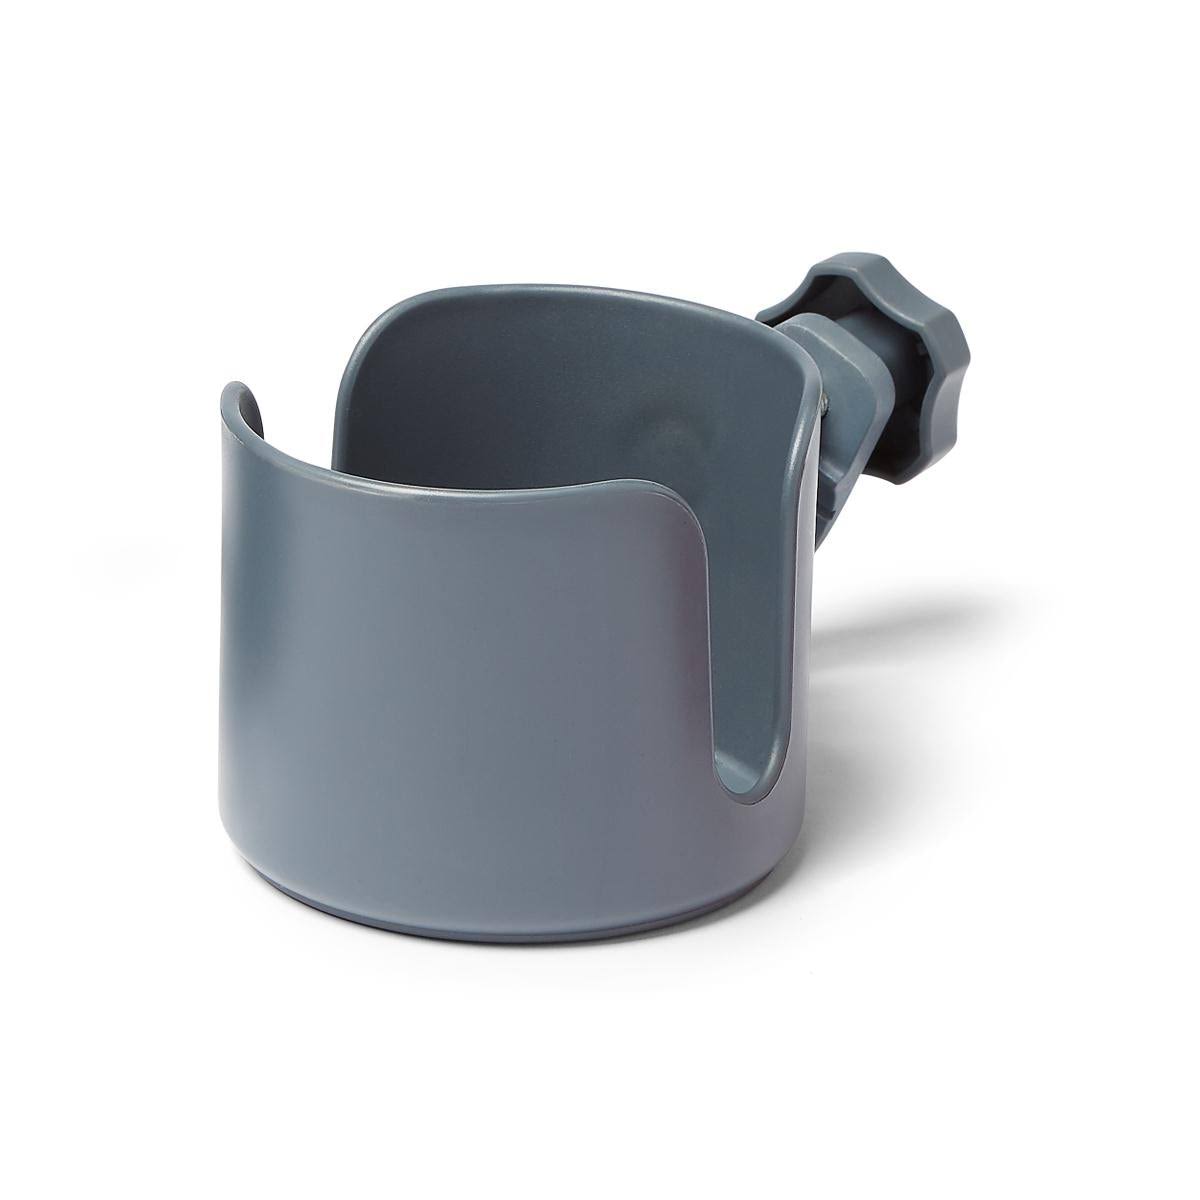 Medline Cup Holder for Wheelchairs